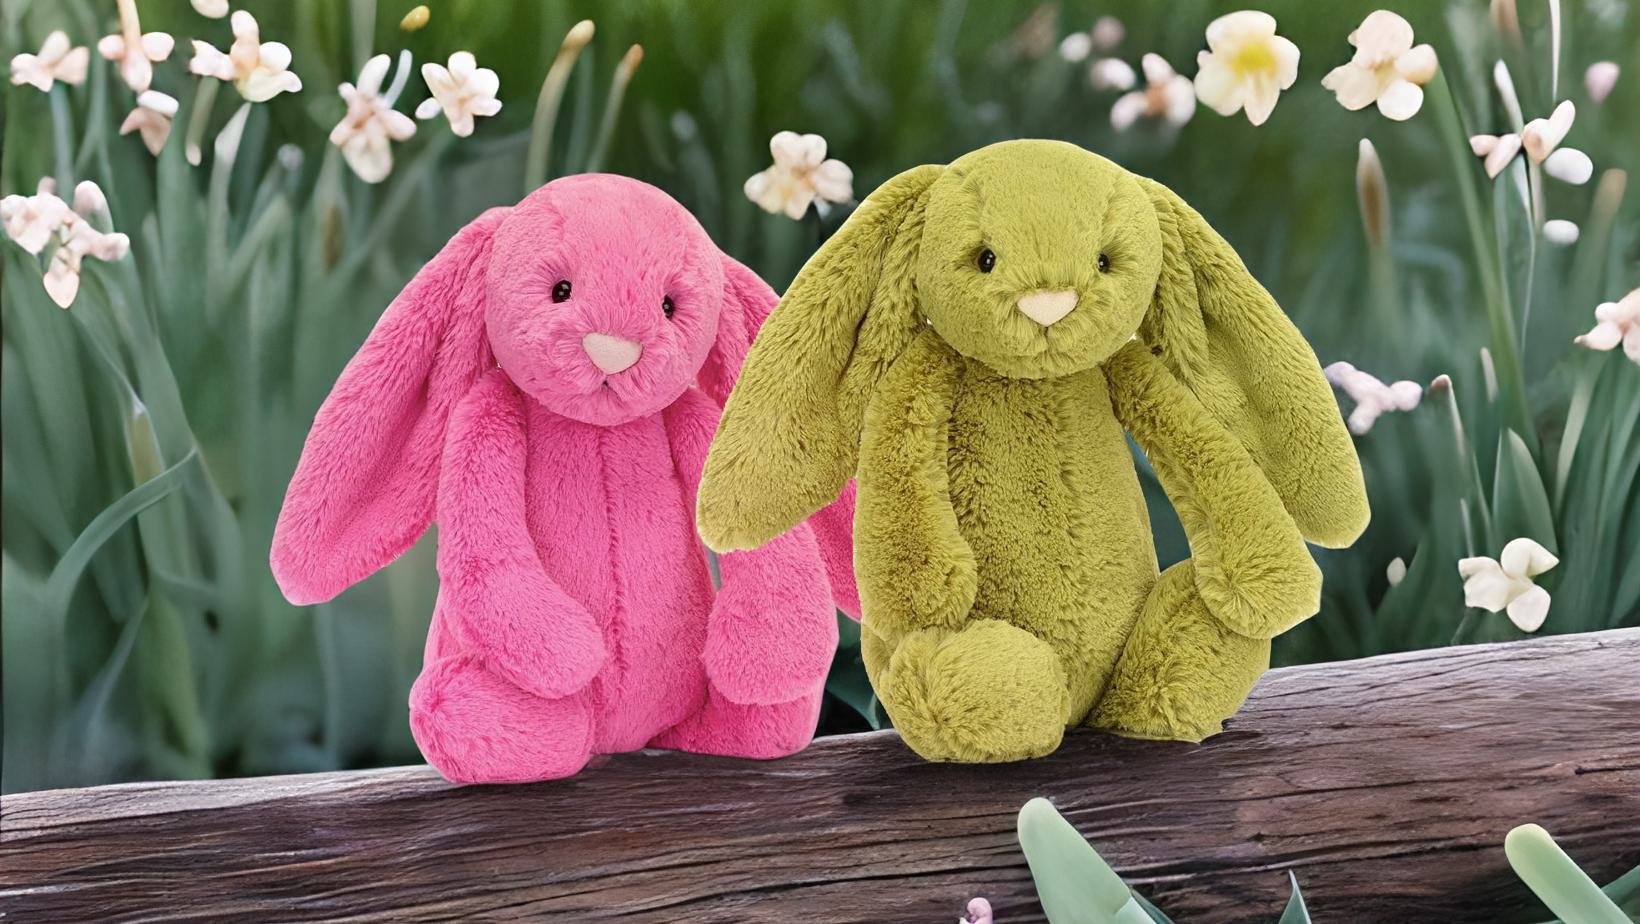 Jellycat Bashful Bunnies in Cerise and Moss